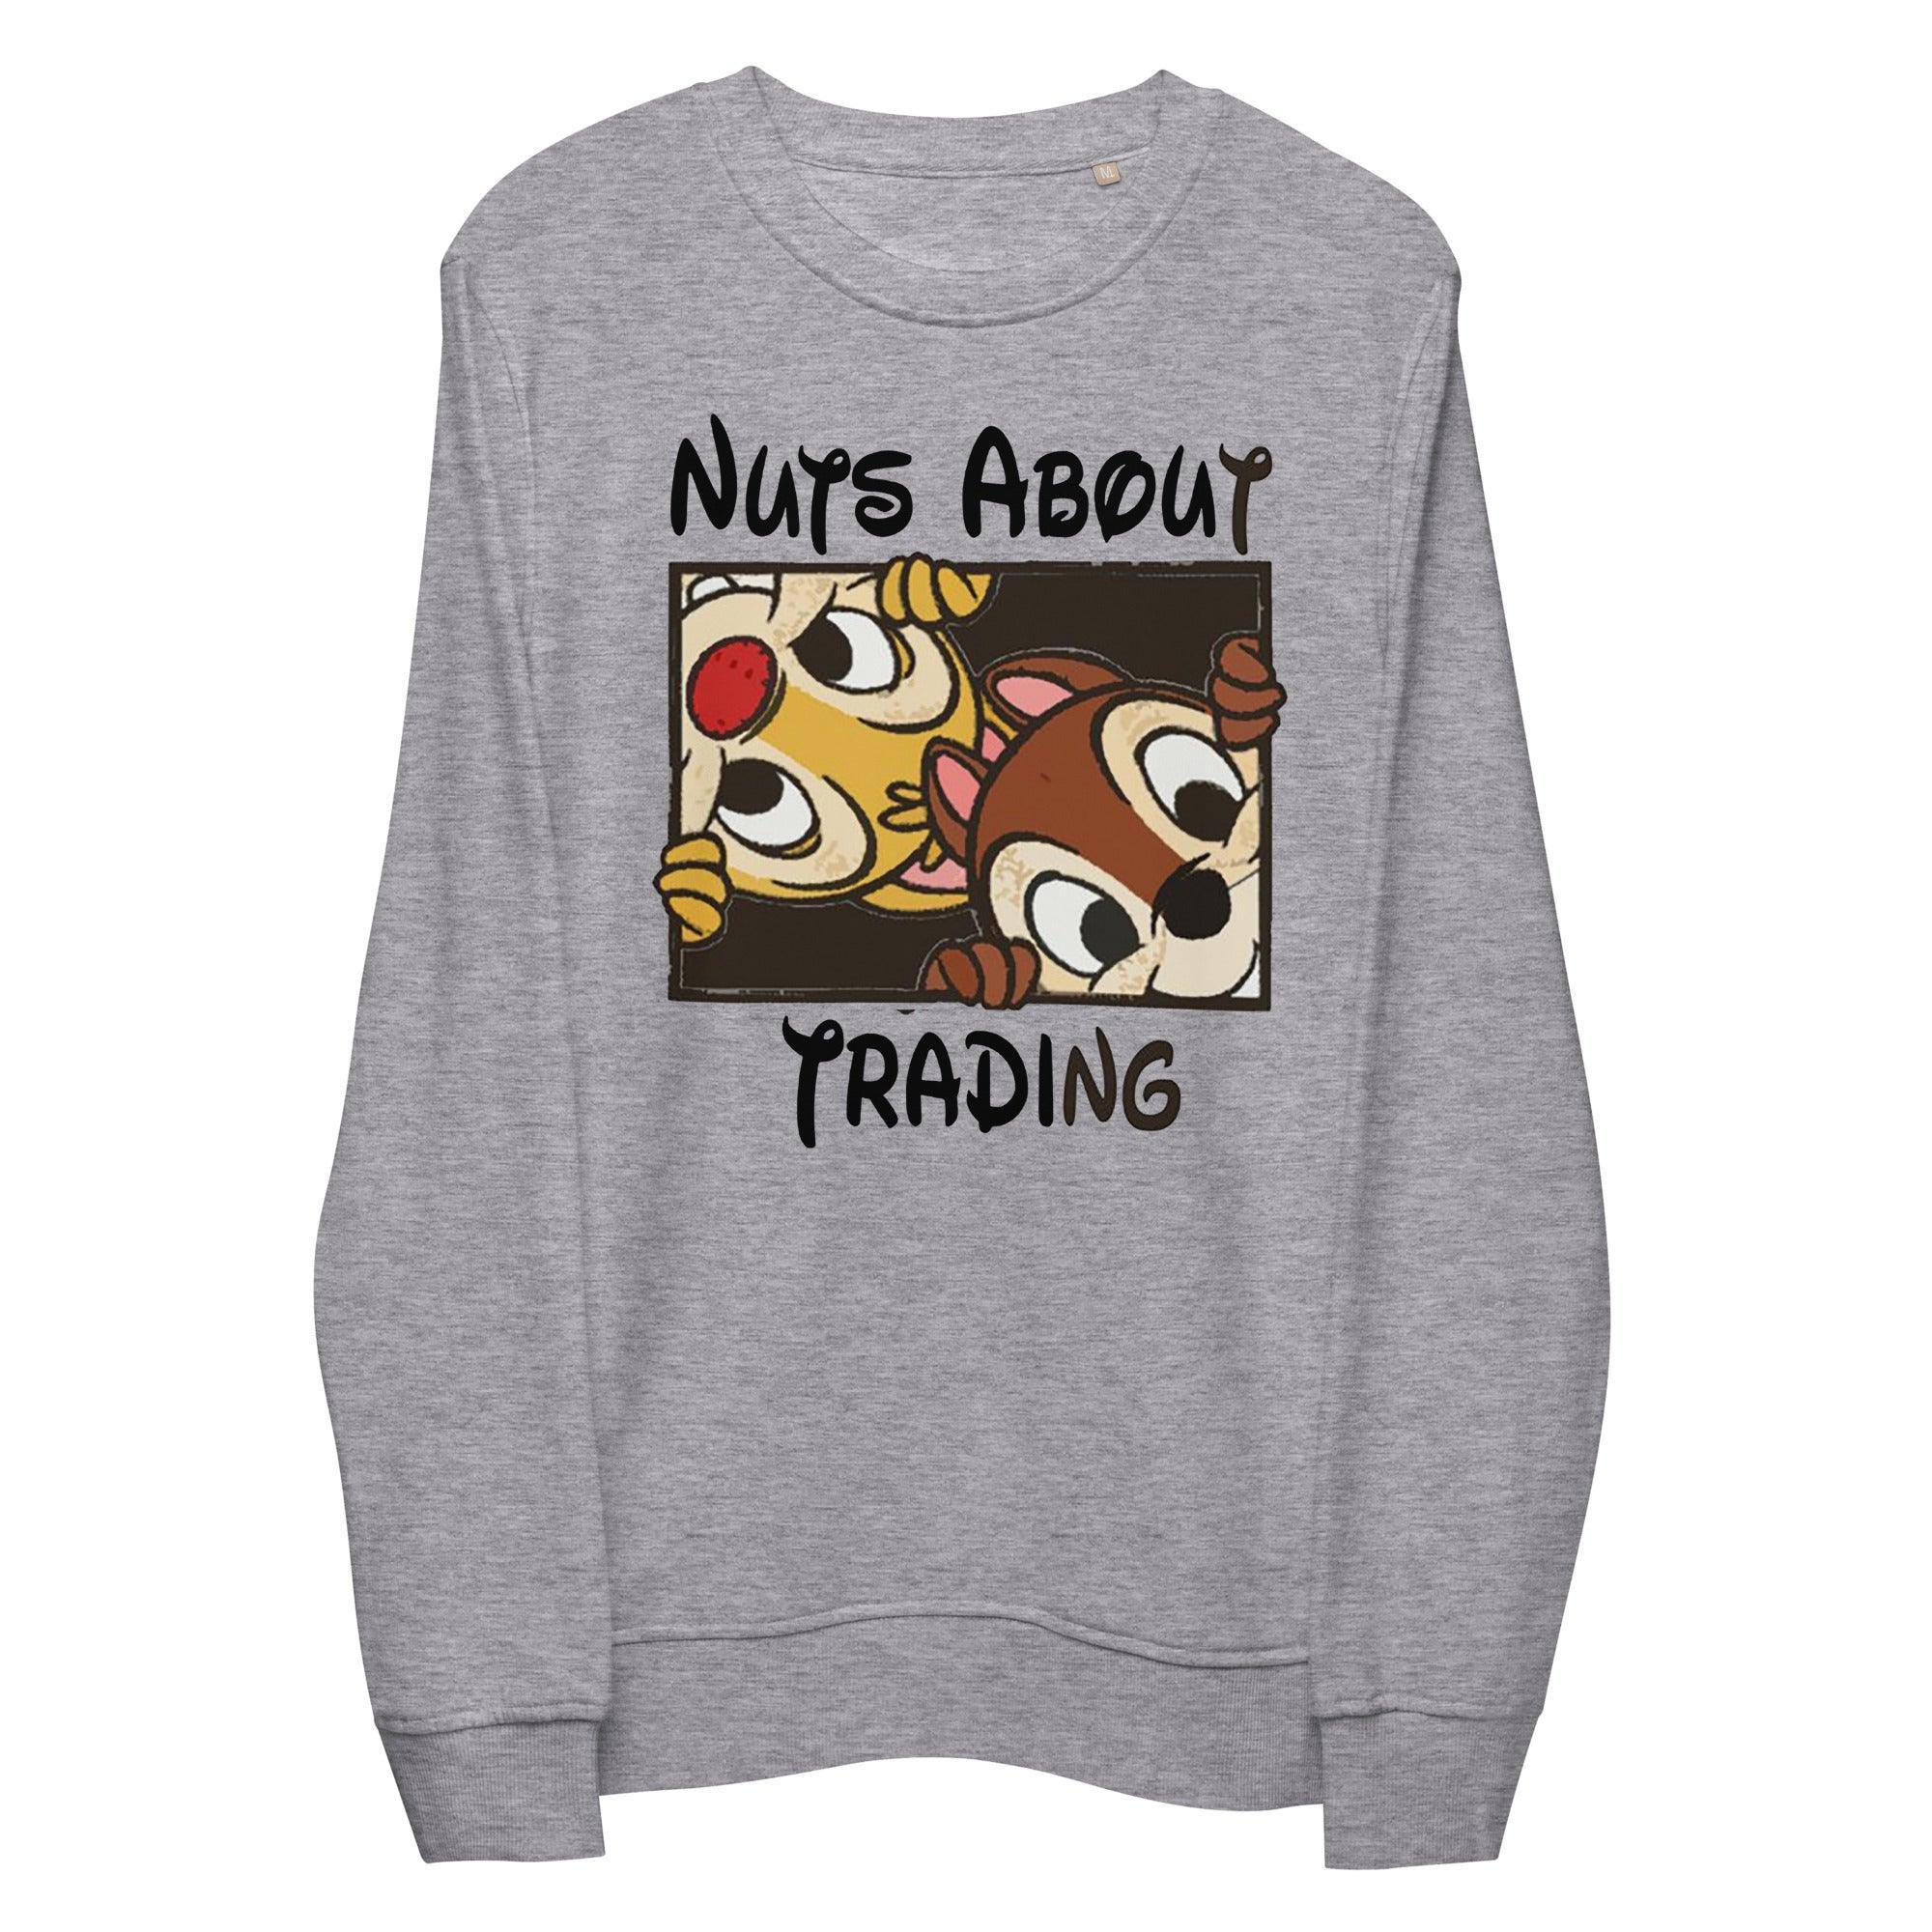 Nuts About Trading Sweatshirt - InvestmenTees